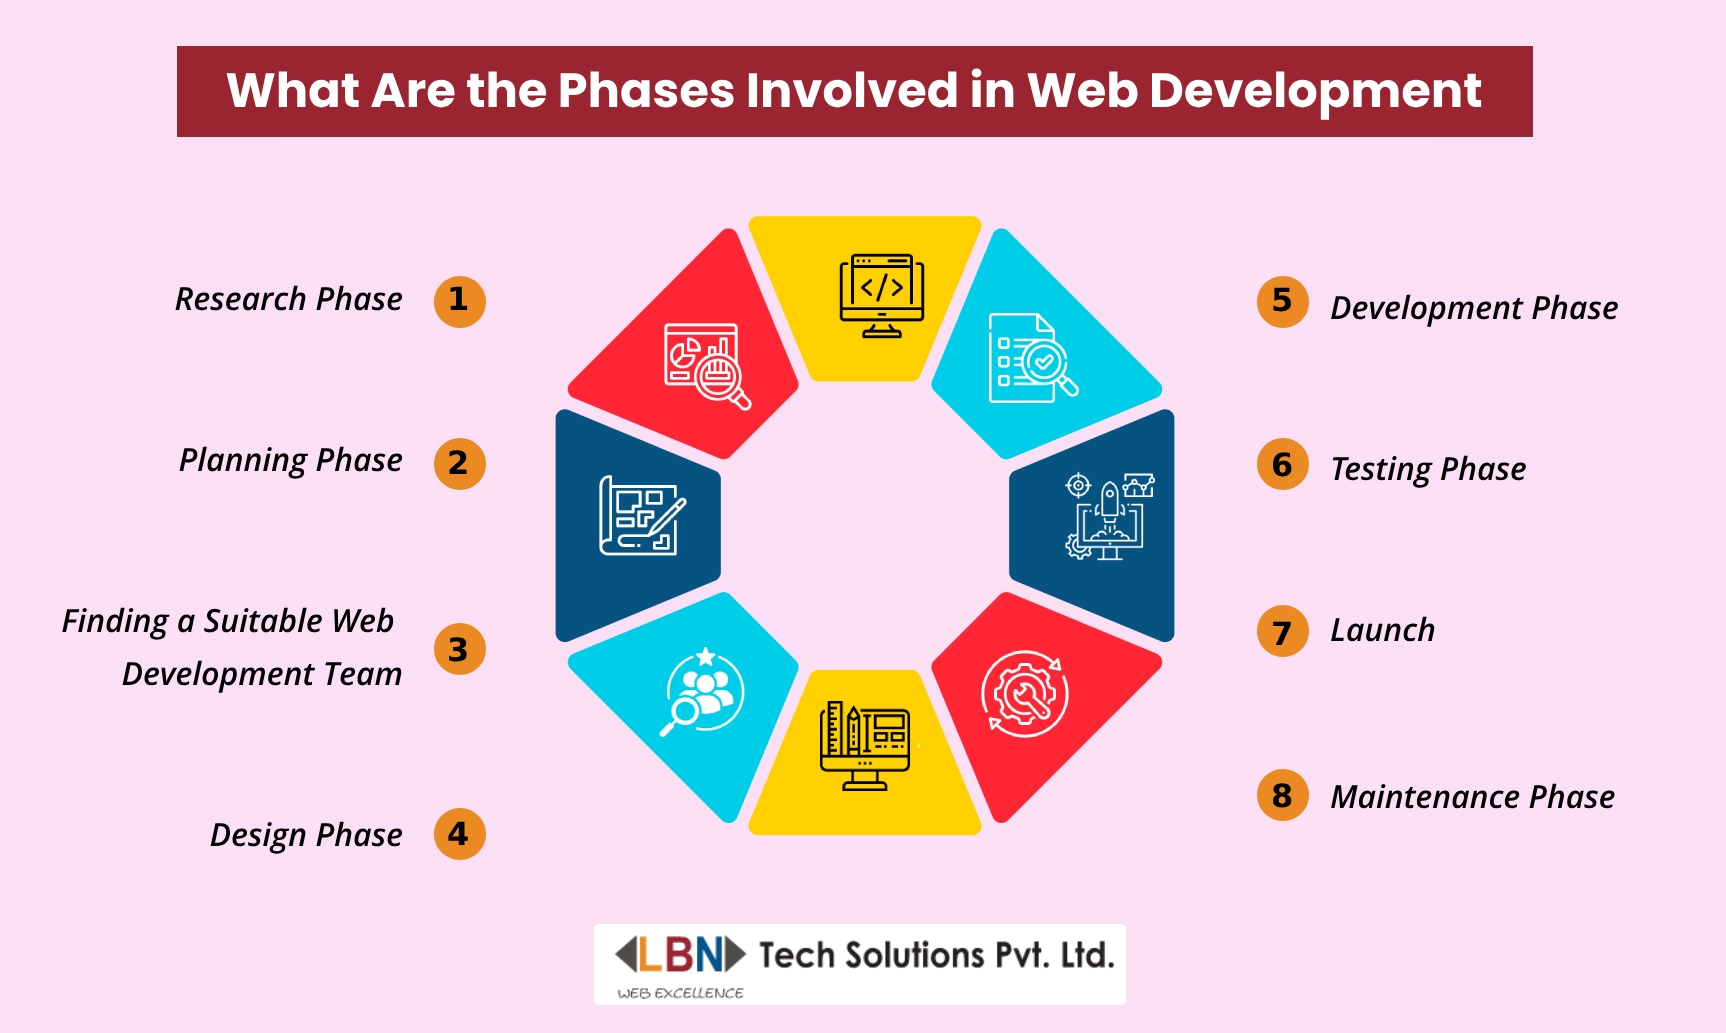 Phases Involved in Web Development